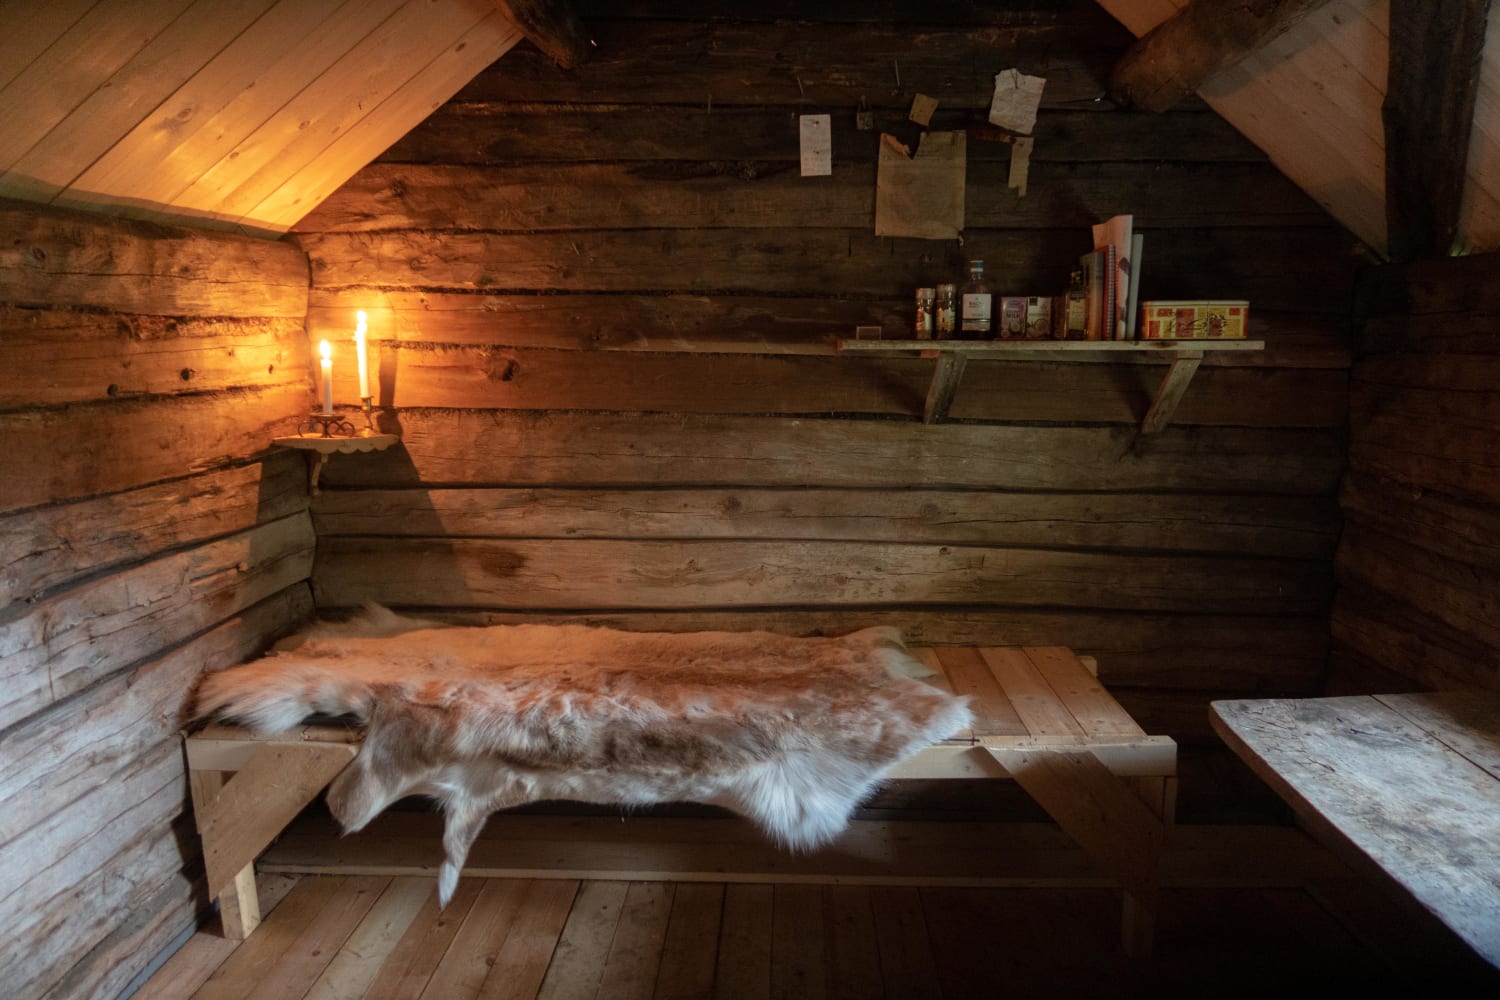 I restored an old cabin I found hidden away in a Norwegian mountain valley.